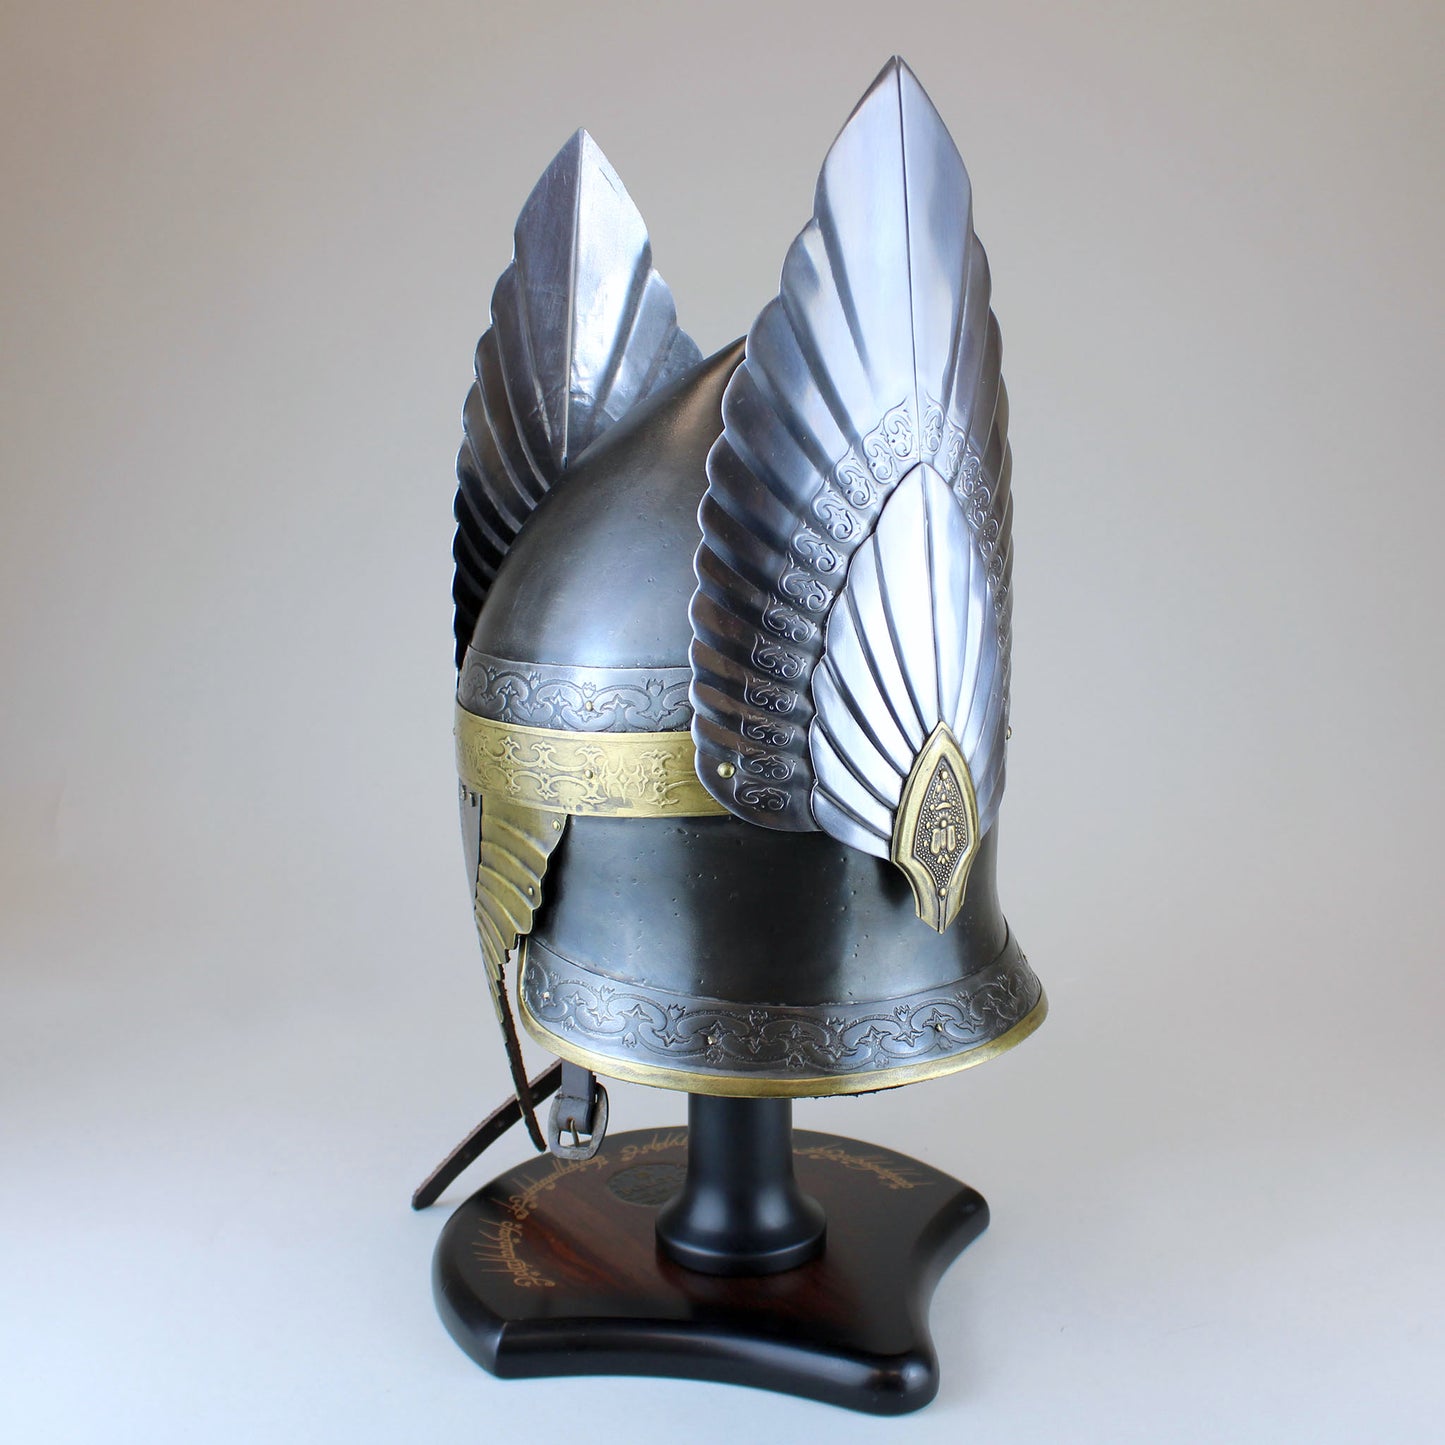 Helm of Elendil (Lord of the Rings) Full-Scale Prop Replica with Stand